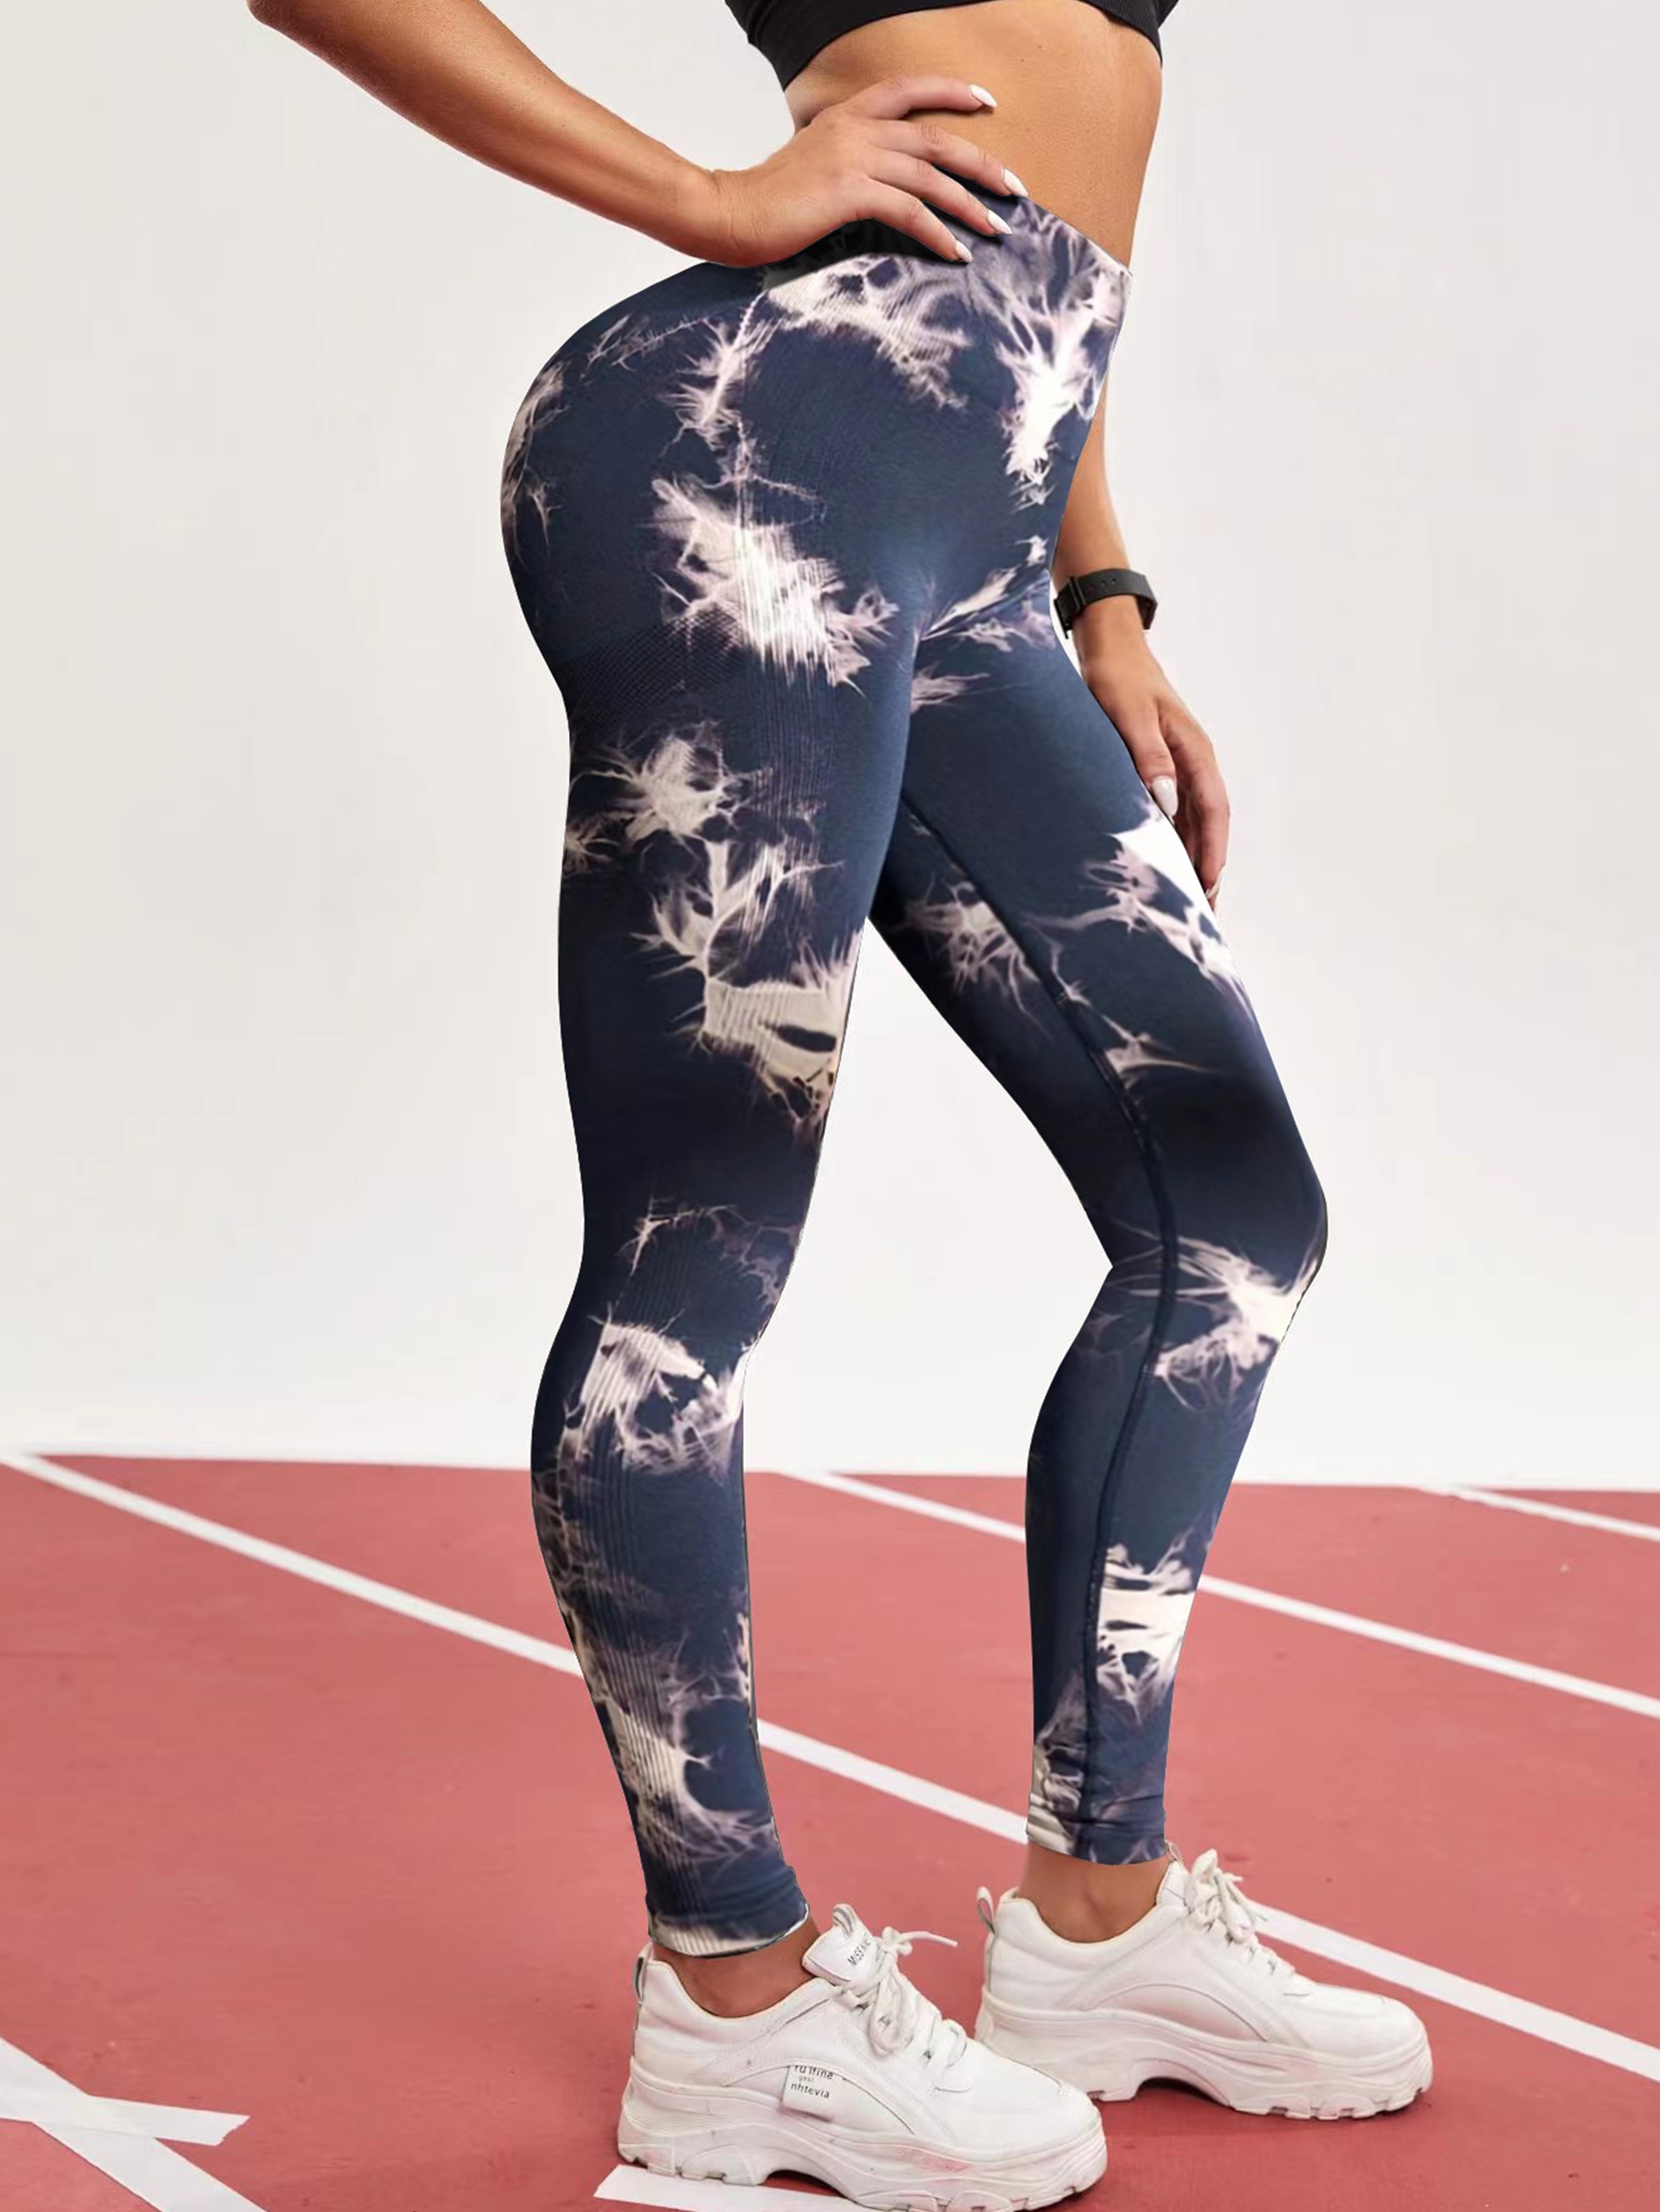 Is That The New Seamless Wide Band Waist Tie Dye Sports Leggings ??